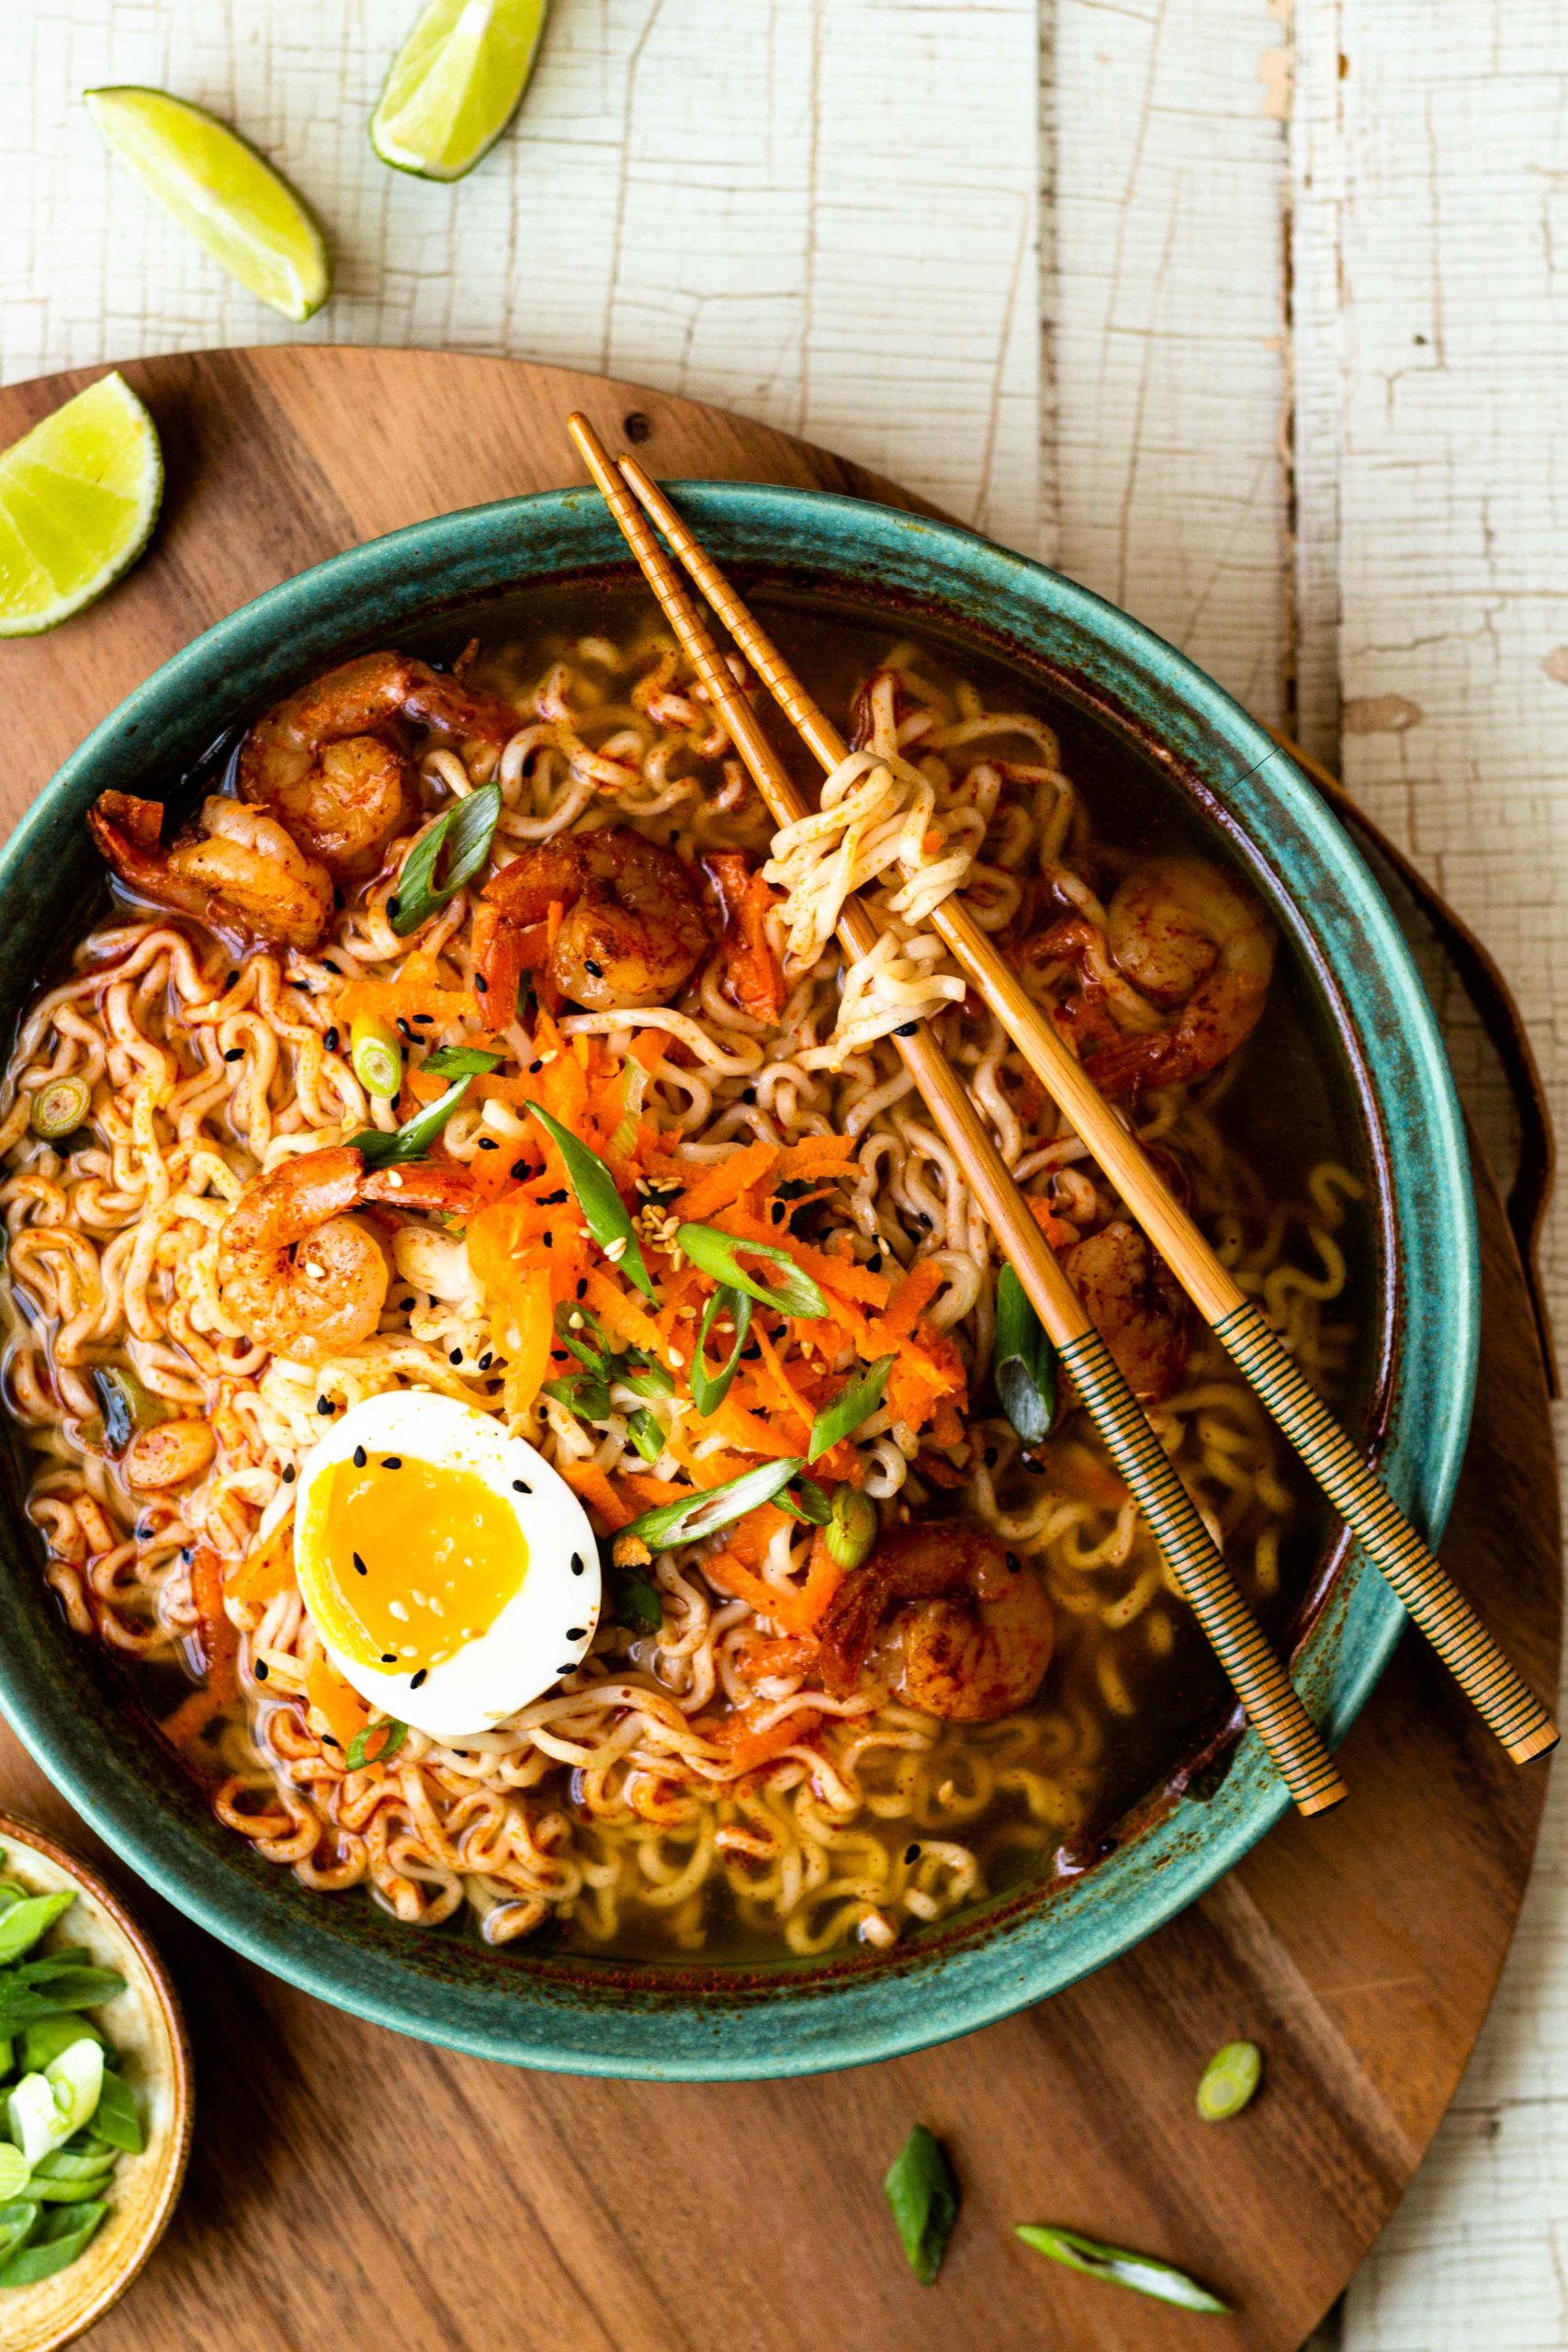 Homemade ramen noodle soup that is all made in one pot and ready in 30 minutes. Made with delicious chili lime seasoned broth, shrimp and lots of ramen noodles. A little spicy and so so good!!